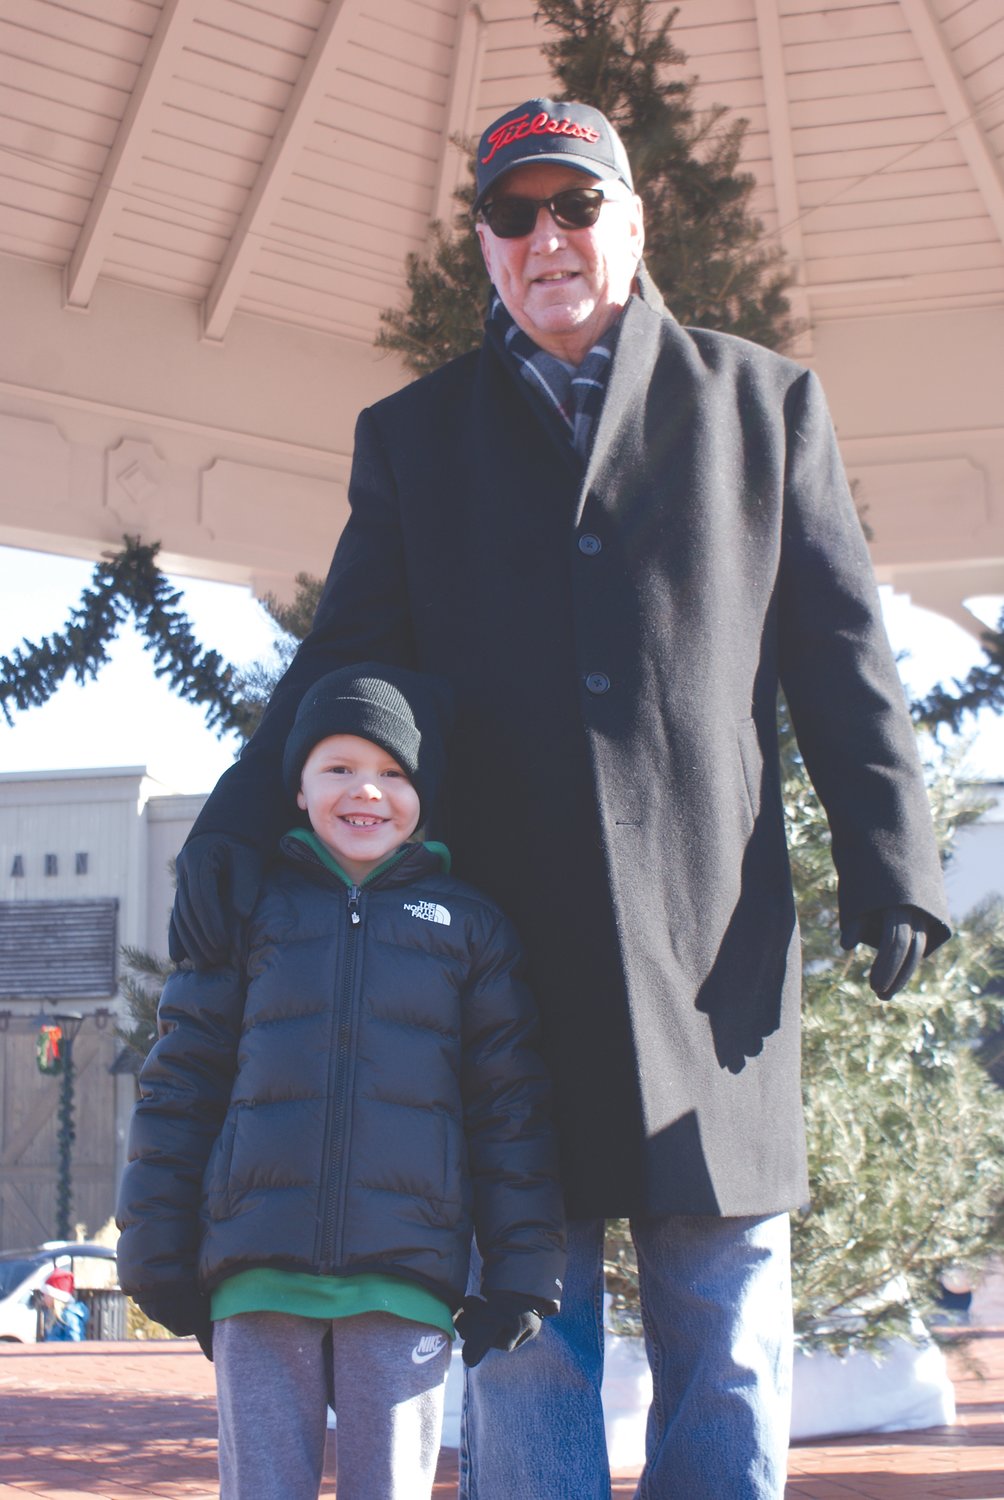 MAYOR HOPKINS BRINGS GREETINGS: Mayor Ken Hopkins brought greetings from the City along with his grandson, JJ Ortega, during Santa’s Grand Entrance in Garden City Center. He wanted to remind everyone that the City Hall Christmas Tree Lighting will be held on Dec. 6 at 5 p.m.